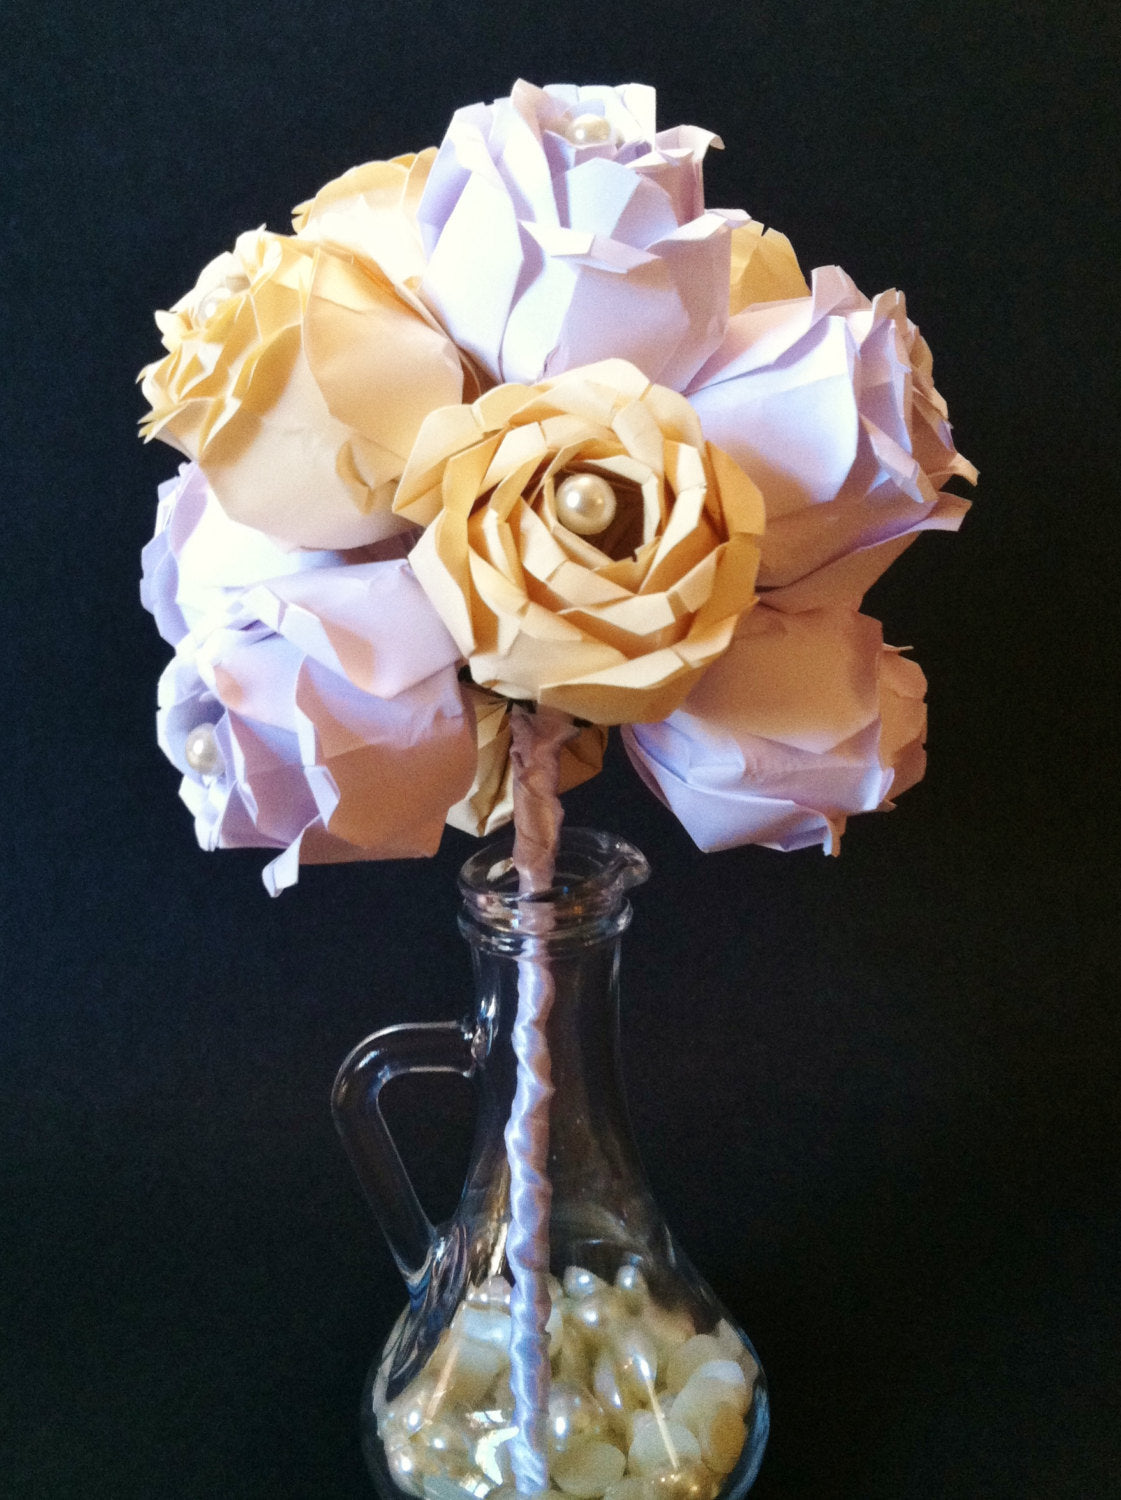 Paper Rose Bouquet Handmade Paper Flowers for Anniversary, Wedding